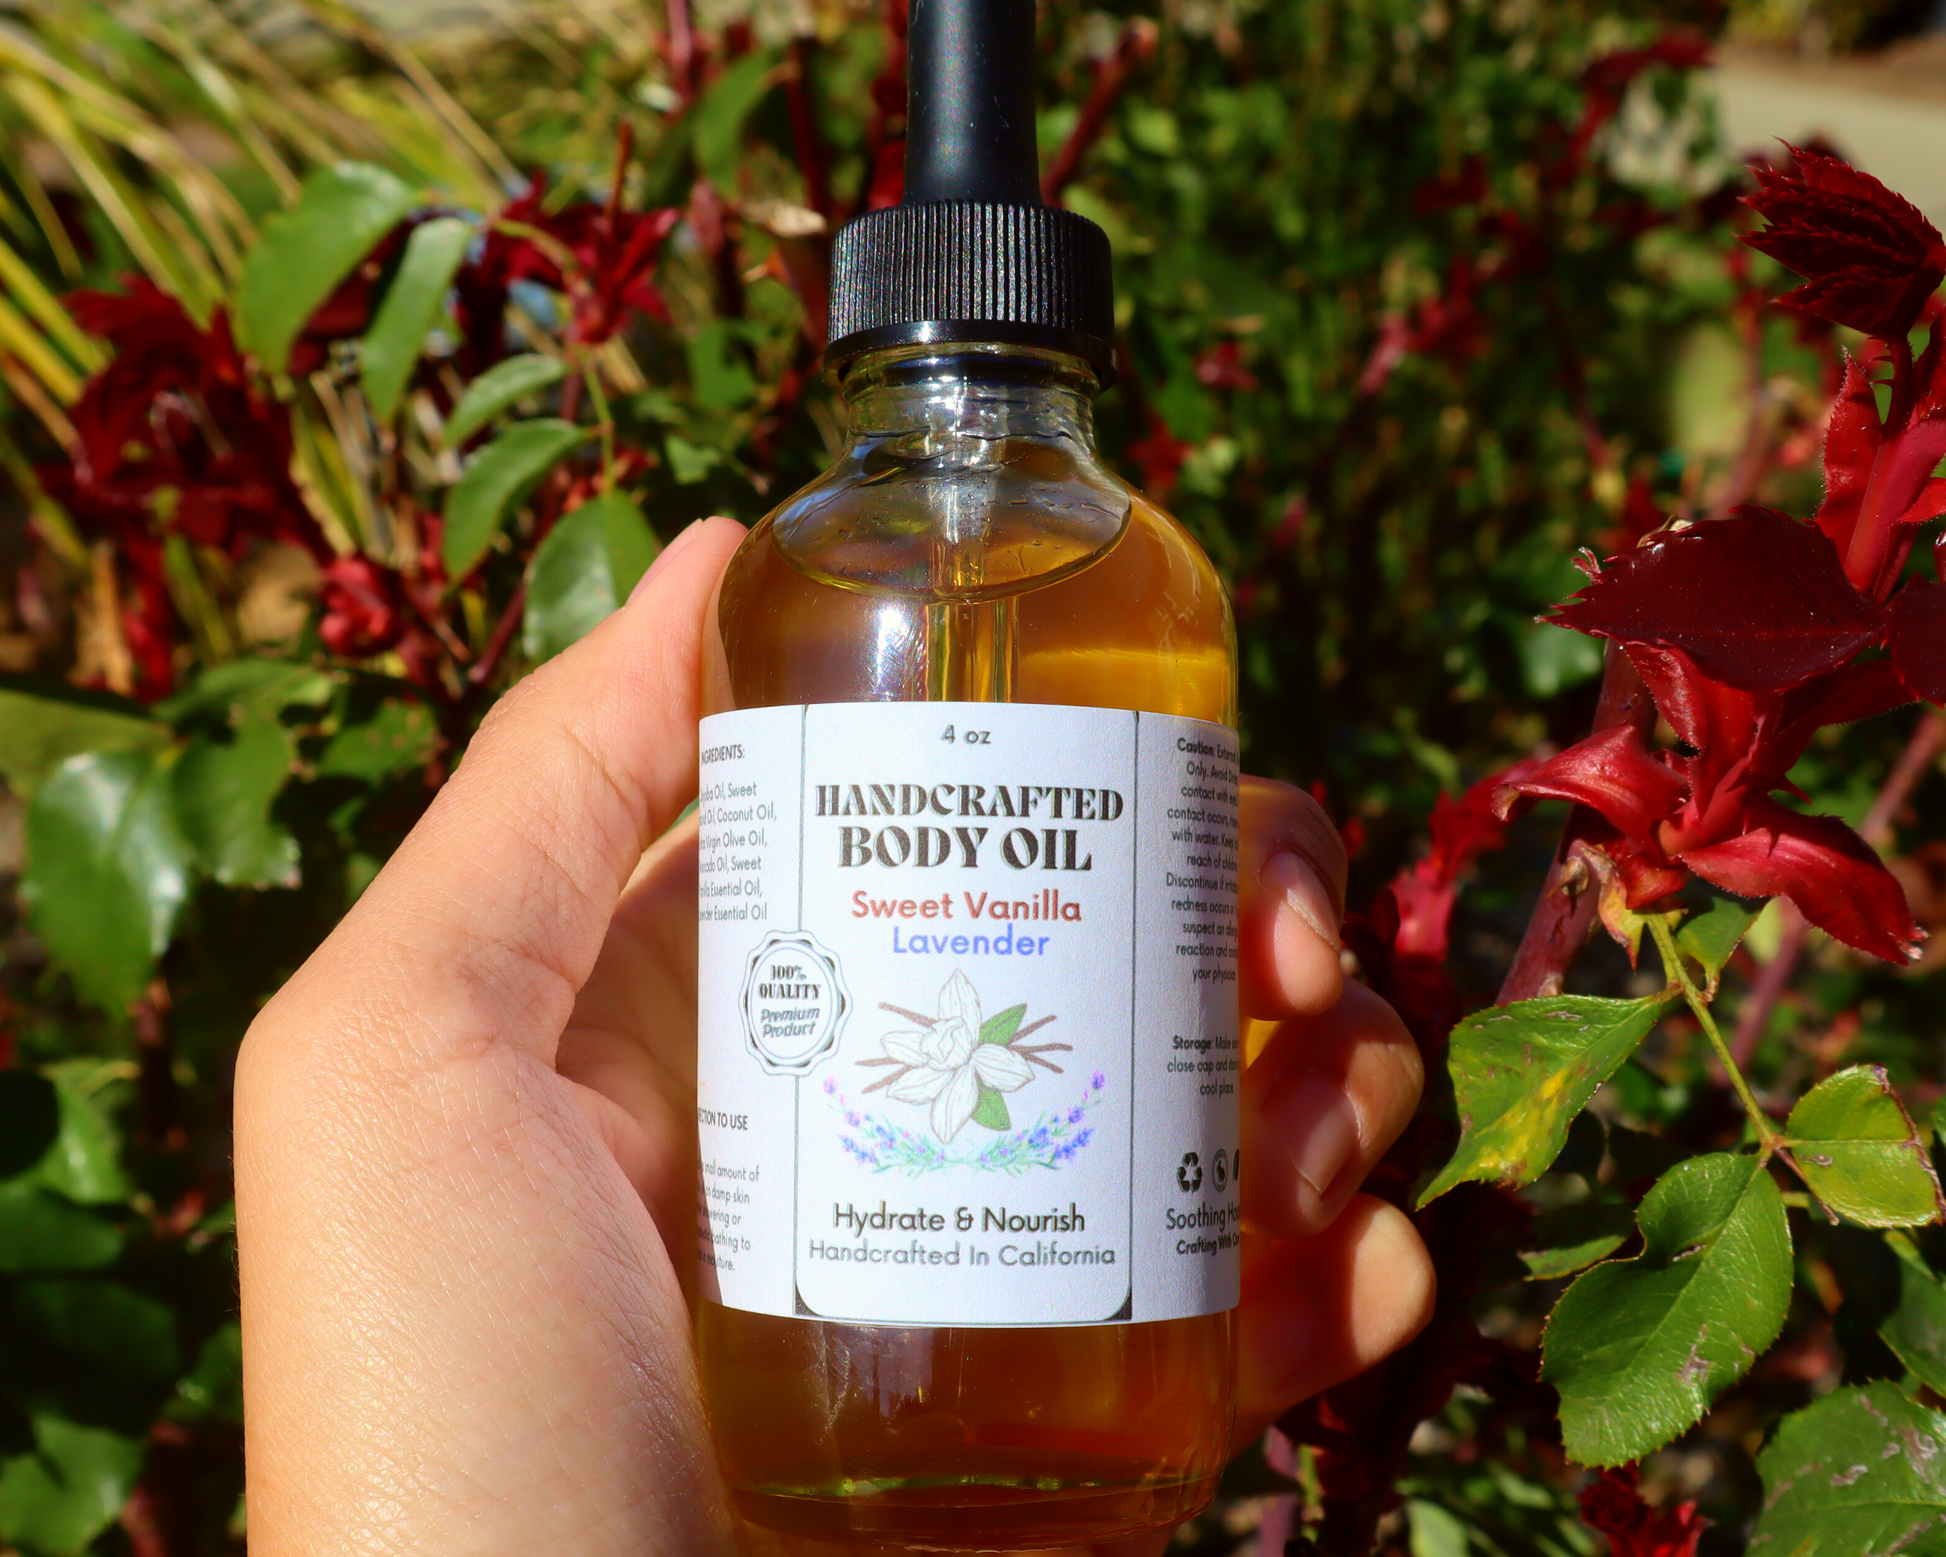 Handcrafted Coconut Cream Pie Body Oil – Soothing House